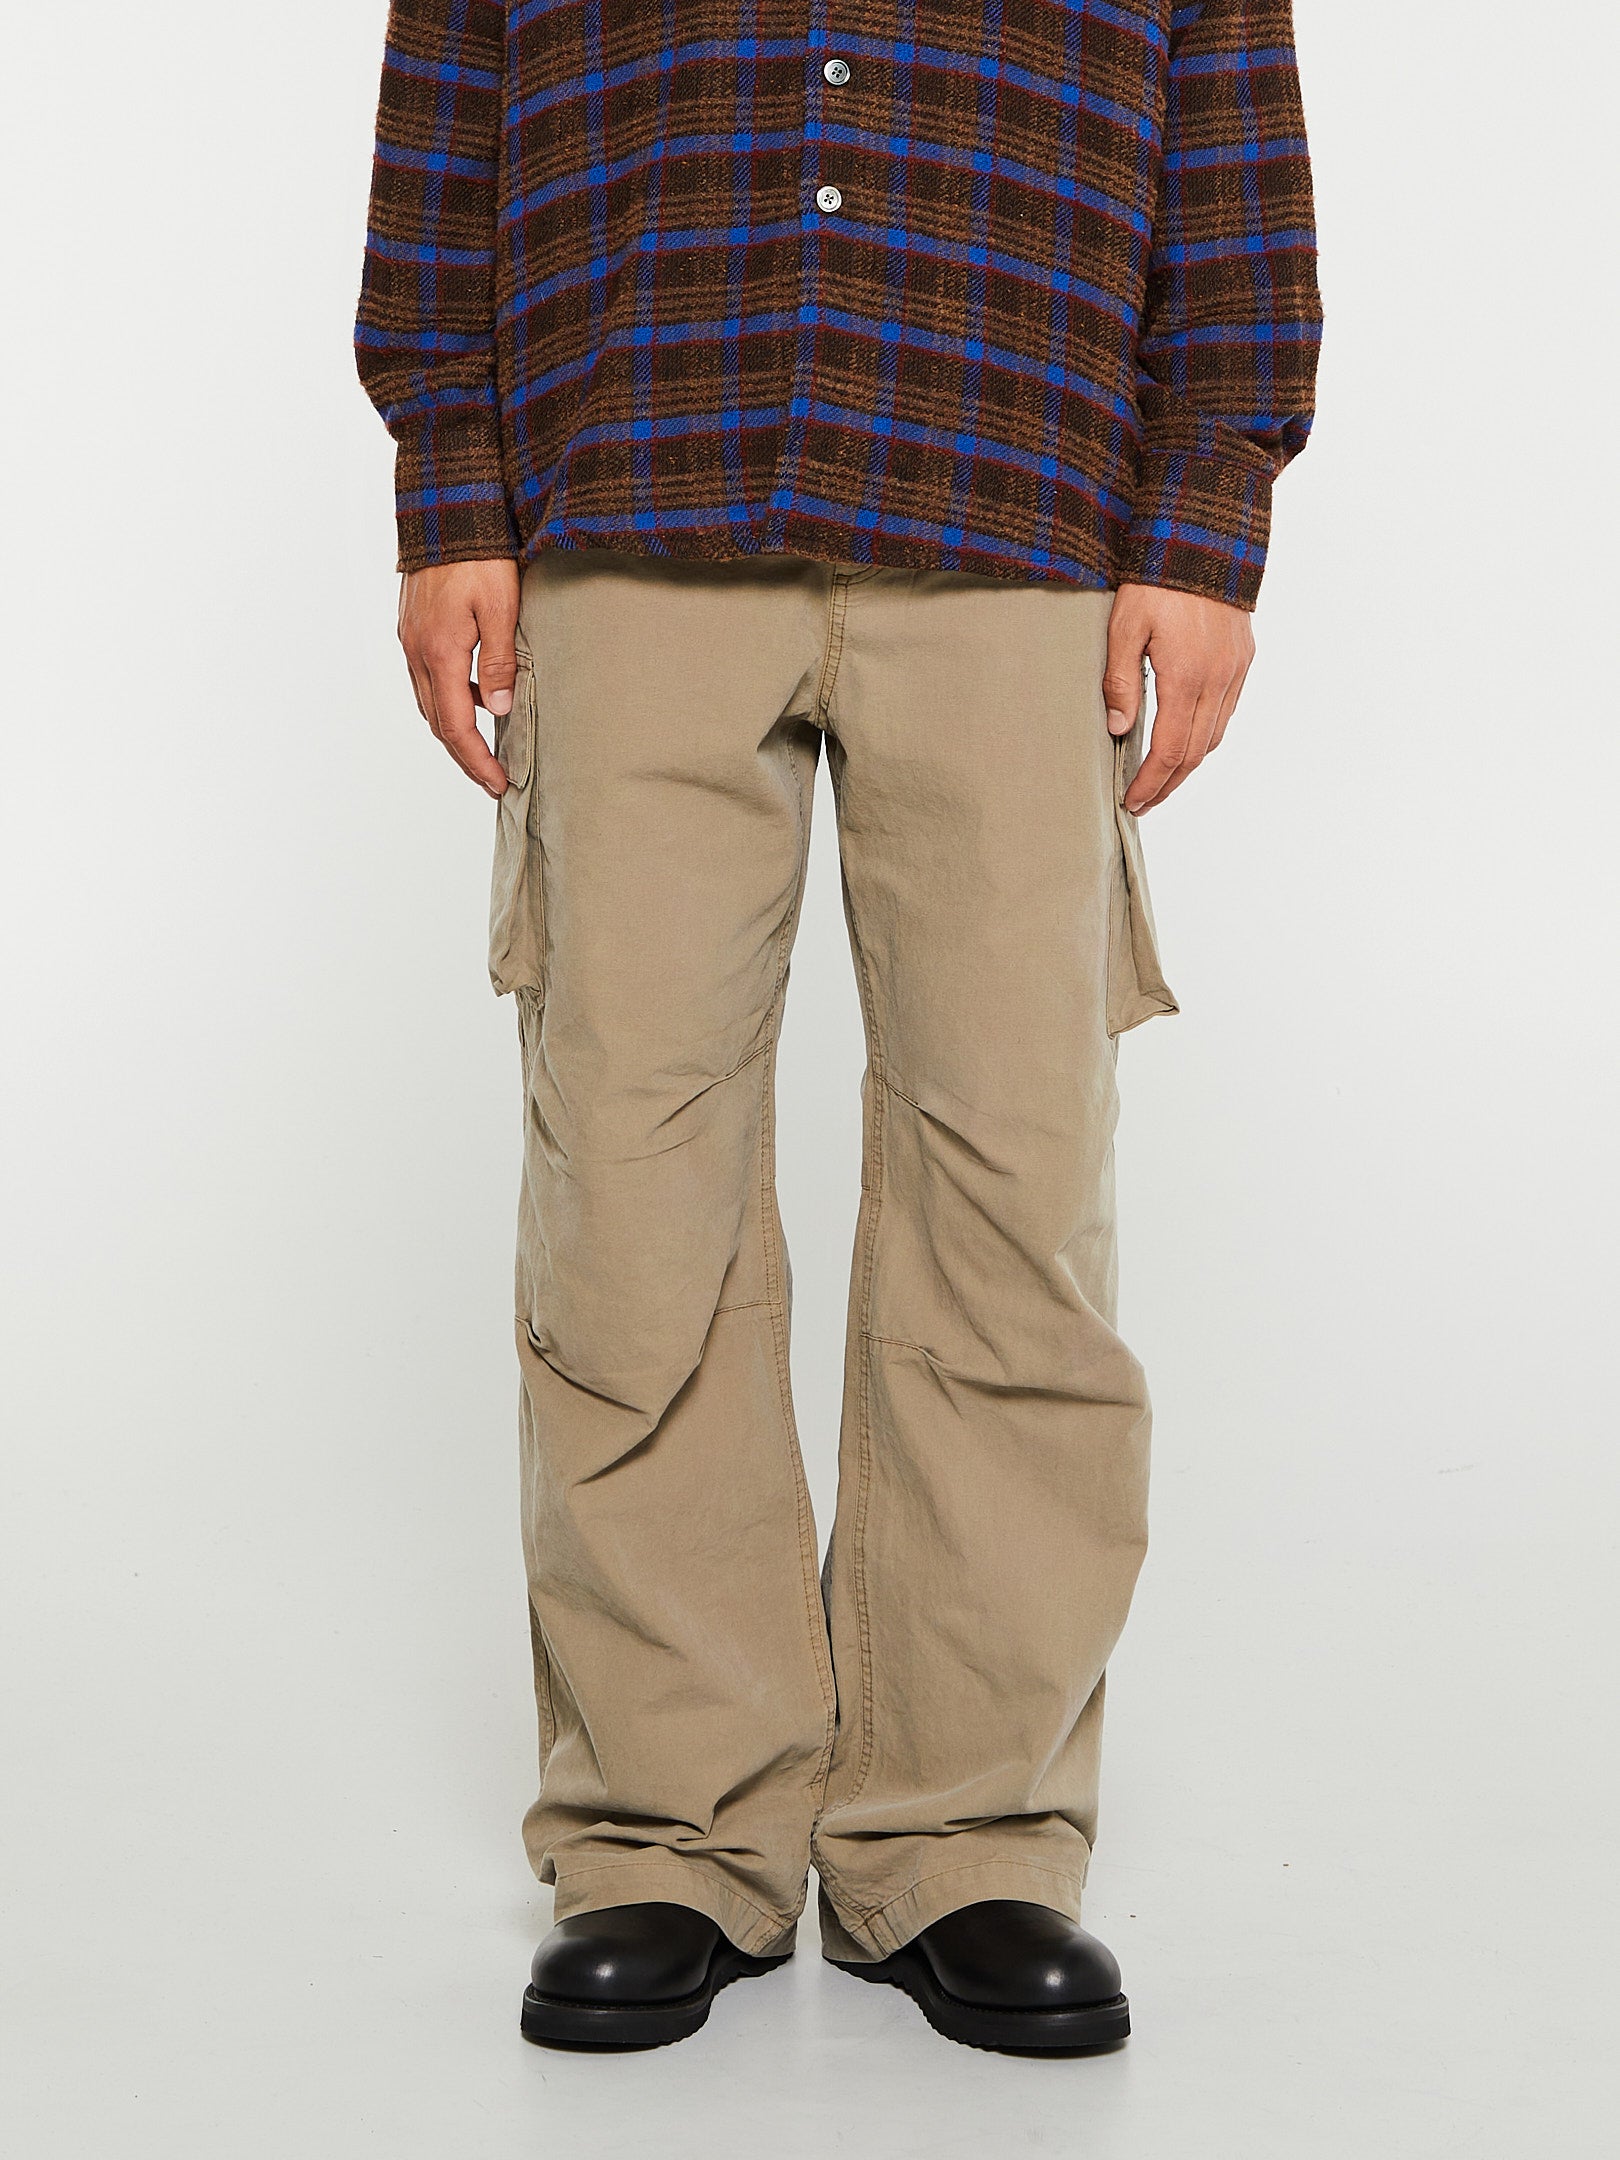 Our Legacy - Mount Cargo Pants in Peafowl Canvas